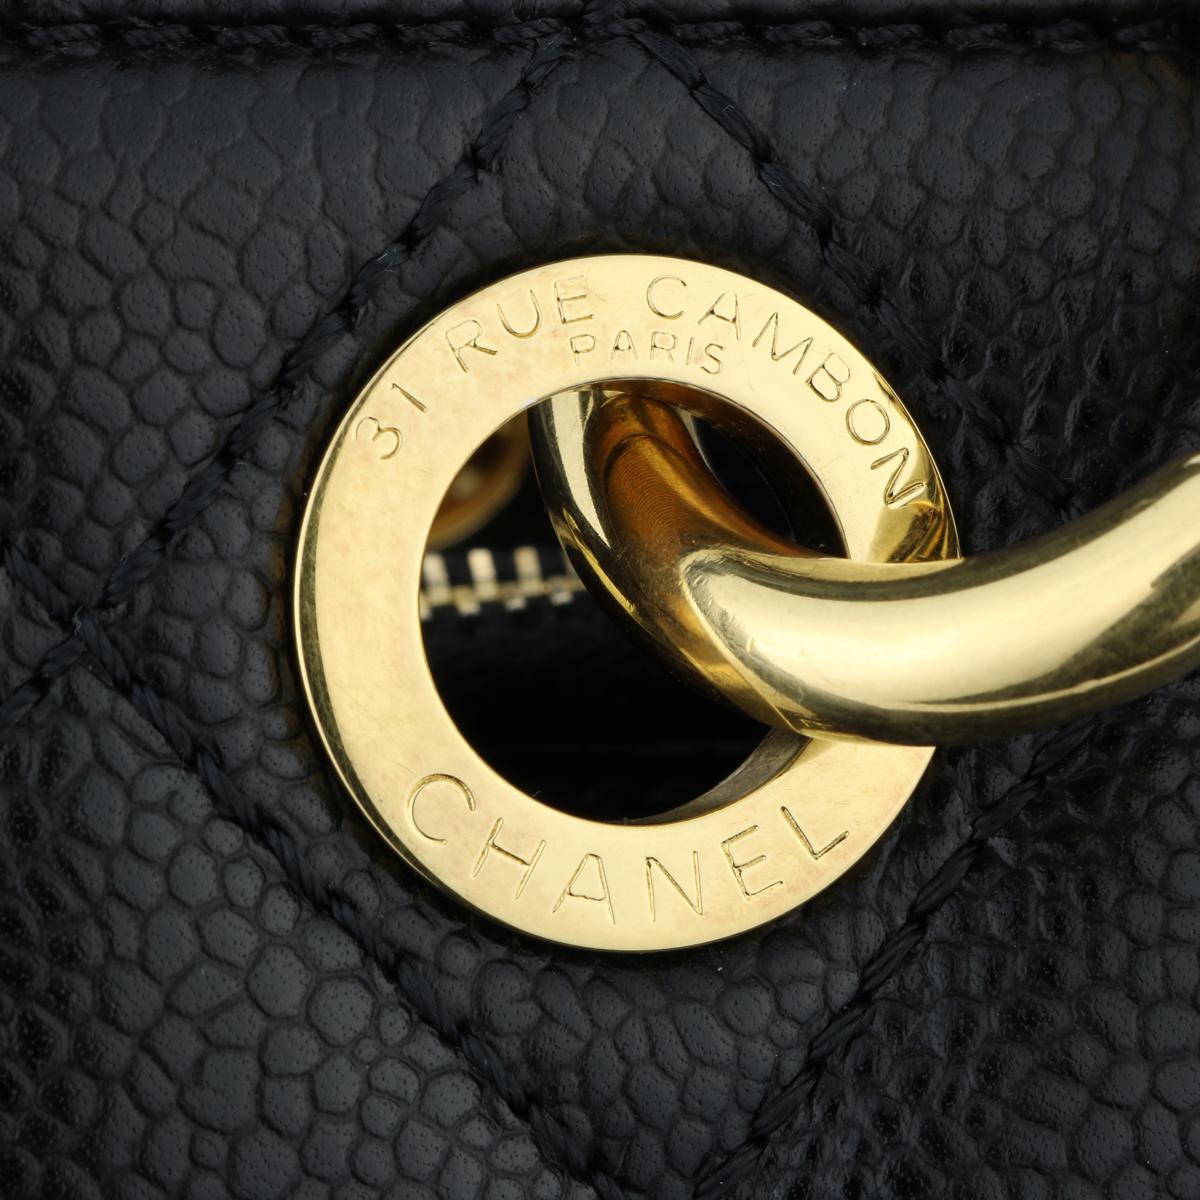 CHANEL Grand Shopping Tote (GST) Bag Black Caviar with Gold Hardware 2015 5